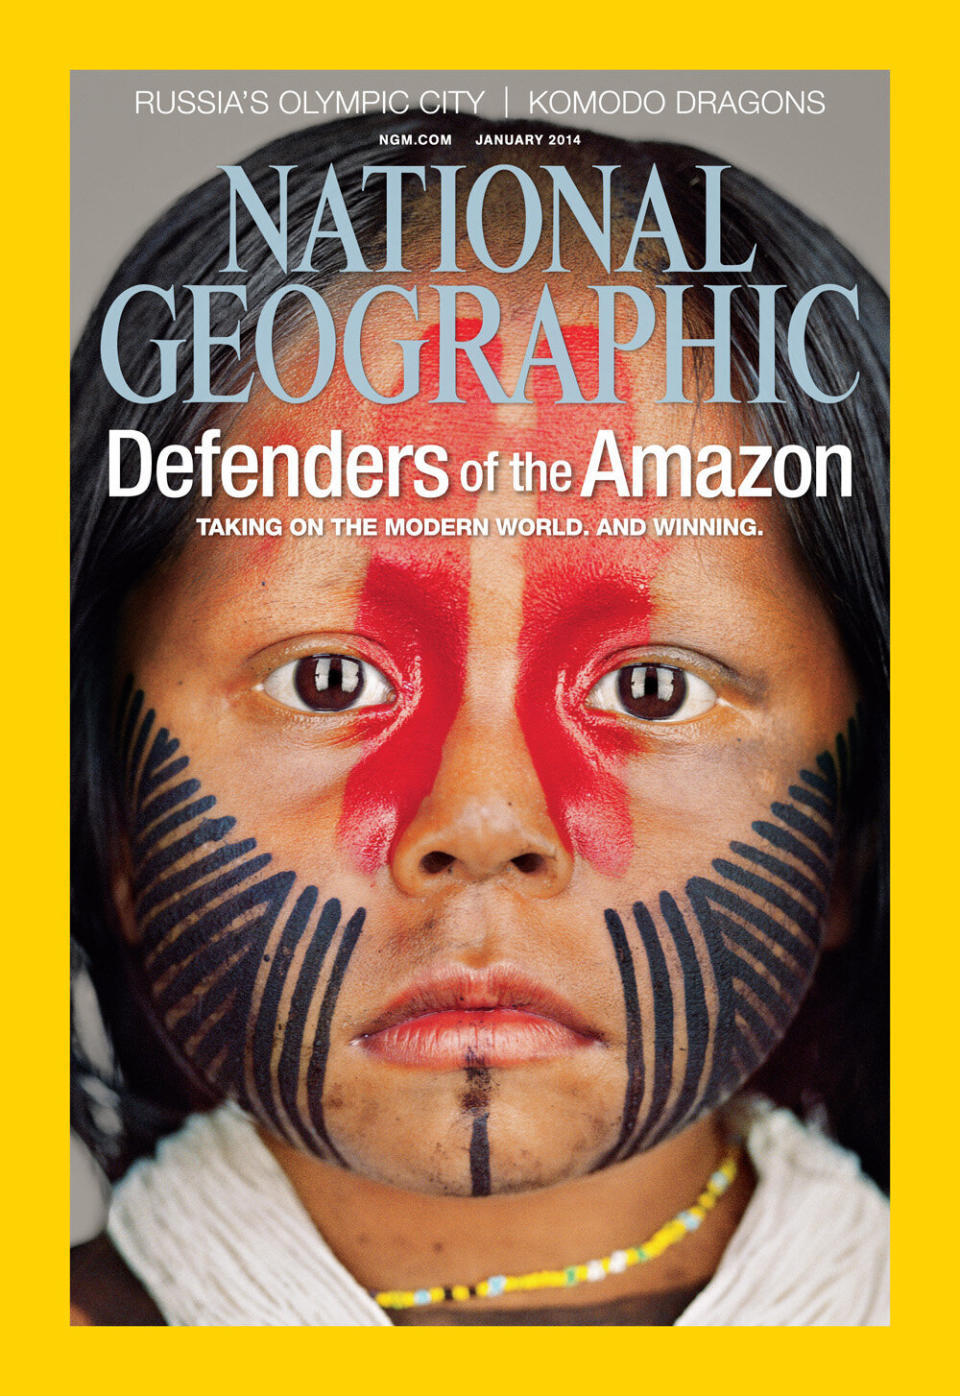 Cover for National Geographic's January issue.